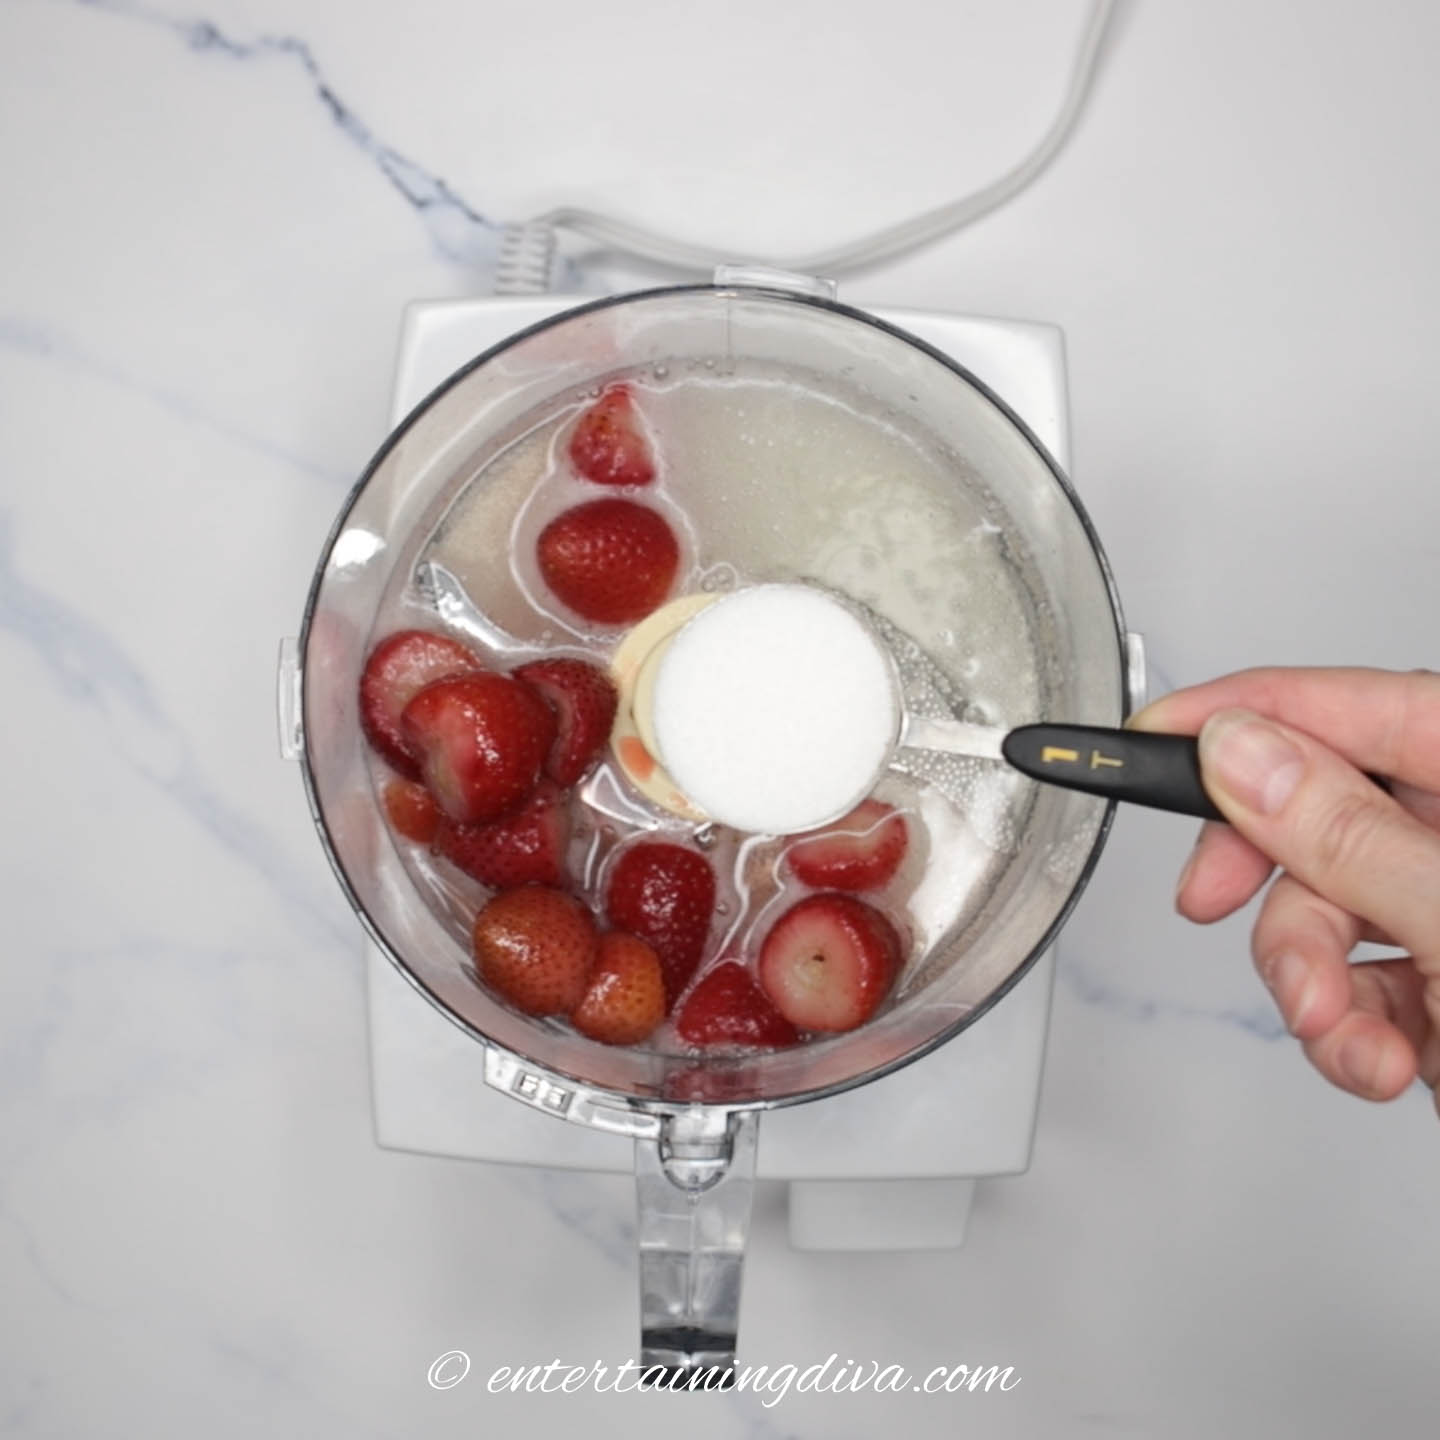 Sugar in a tablespoon above a food processor with strawberries and sparkling wine in it